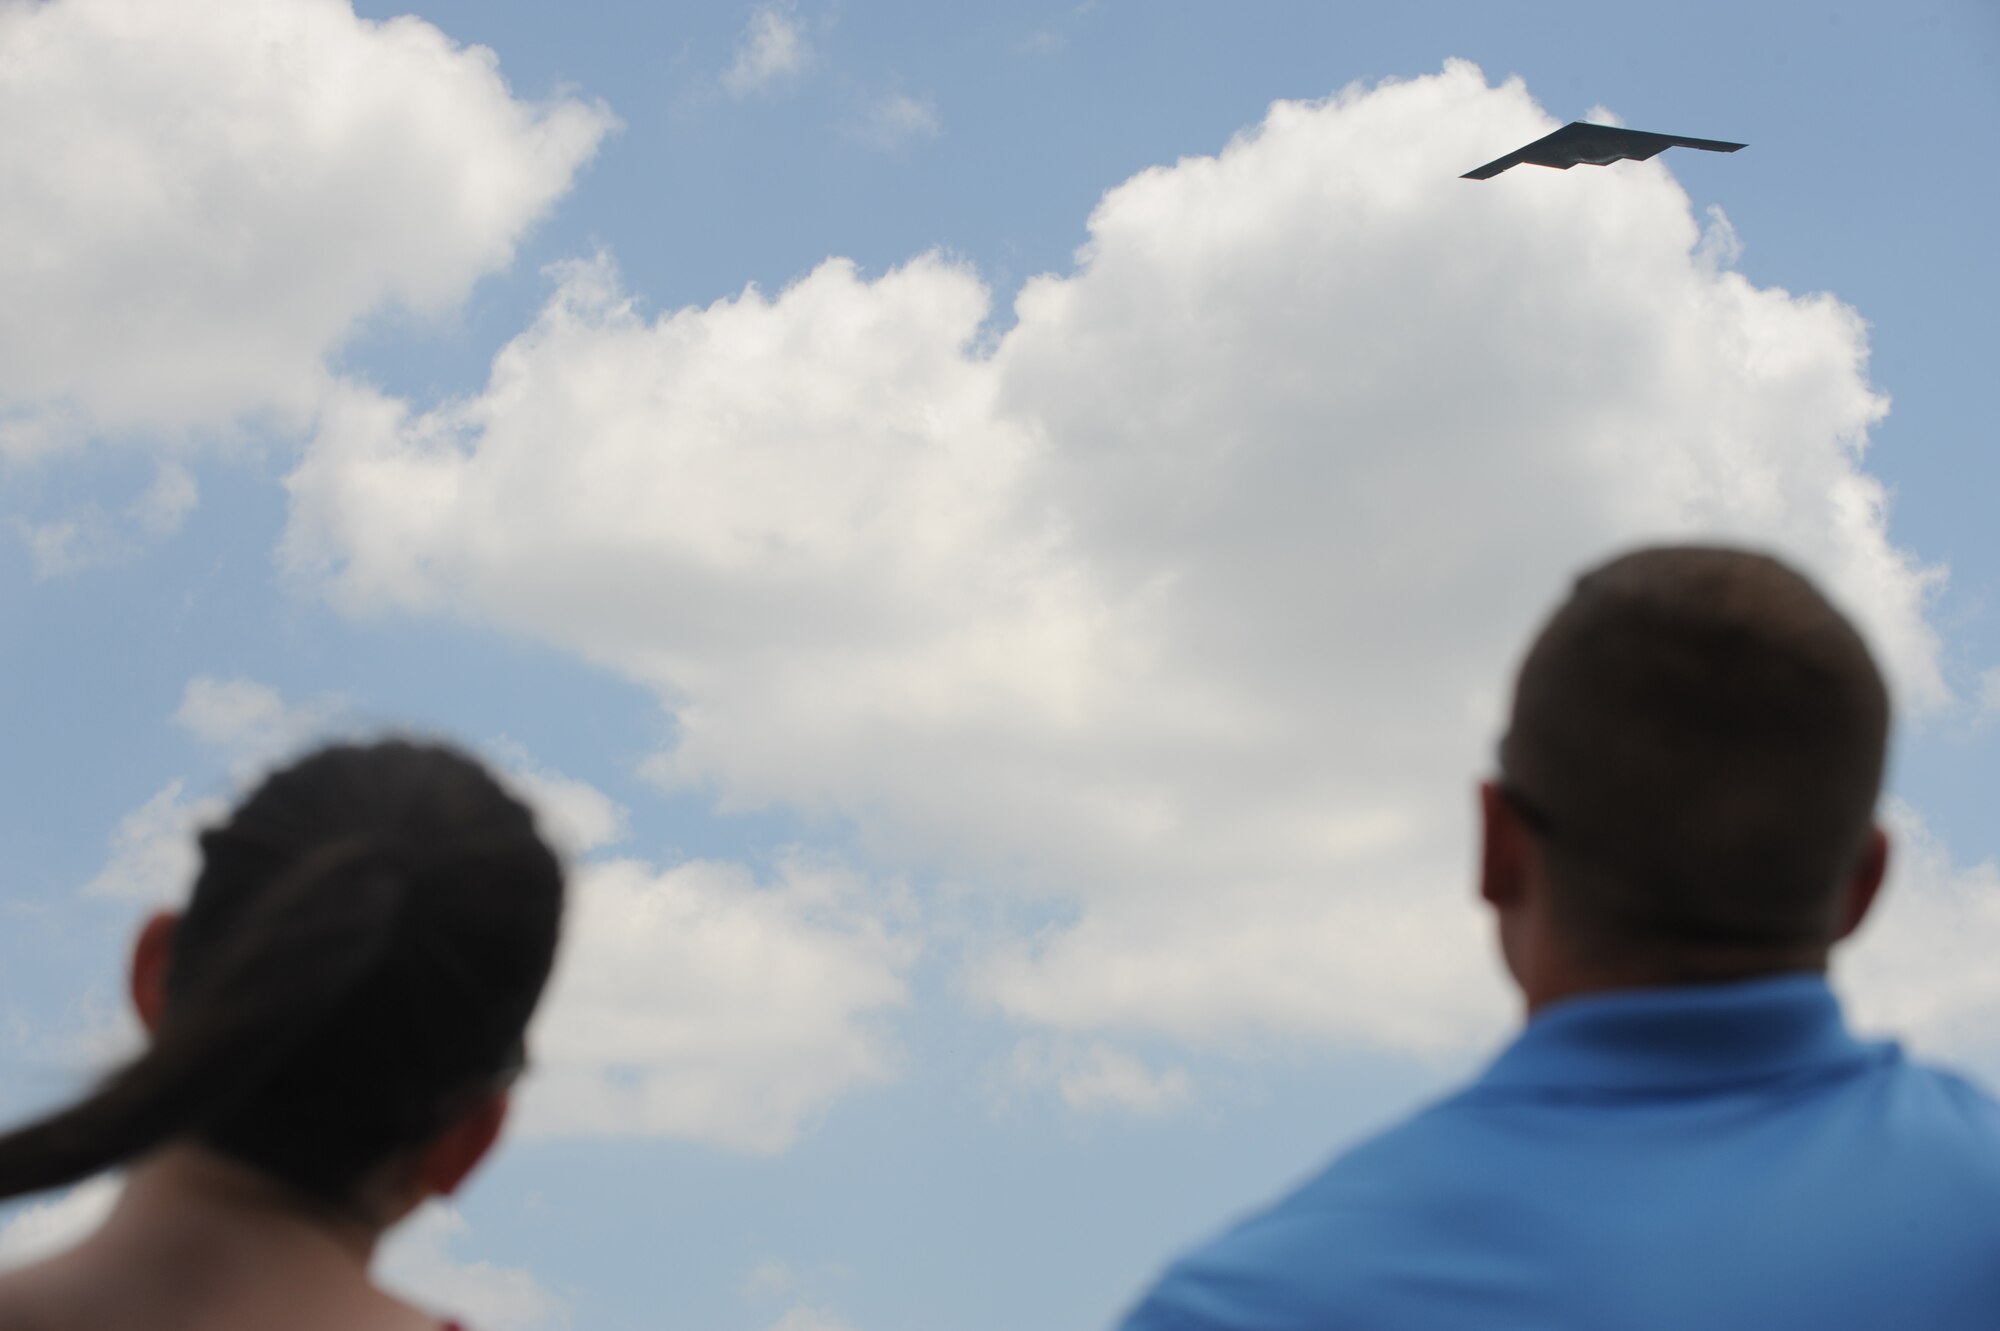 A 509th Bomb Wing B-2 Spirit conducts a fly-by during the Scott Air Force Base 2017 Air Show and Open House June 11, which celebrates the base’s 100th anniversary.  Based out of Whiteman AFB, the B-2 provides the penetrating flexibility and effectiveness inherent in manned bombers.  Its stealth characteristics give it the unique ability to penetrate an enemy’s most sophisticated defenses and threaten its most valued and heavily defended targets, making this aircraft an effective deterrent and combat force. (U.S. Air Force photo by Tech. Sgt. Maria Castle)